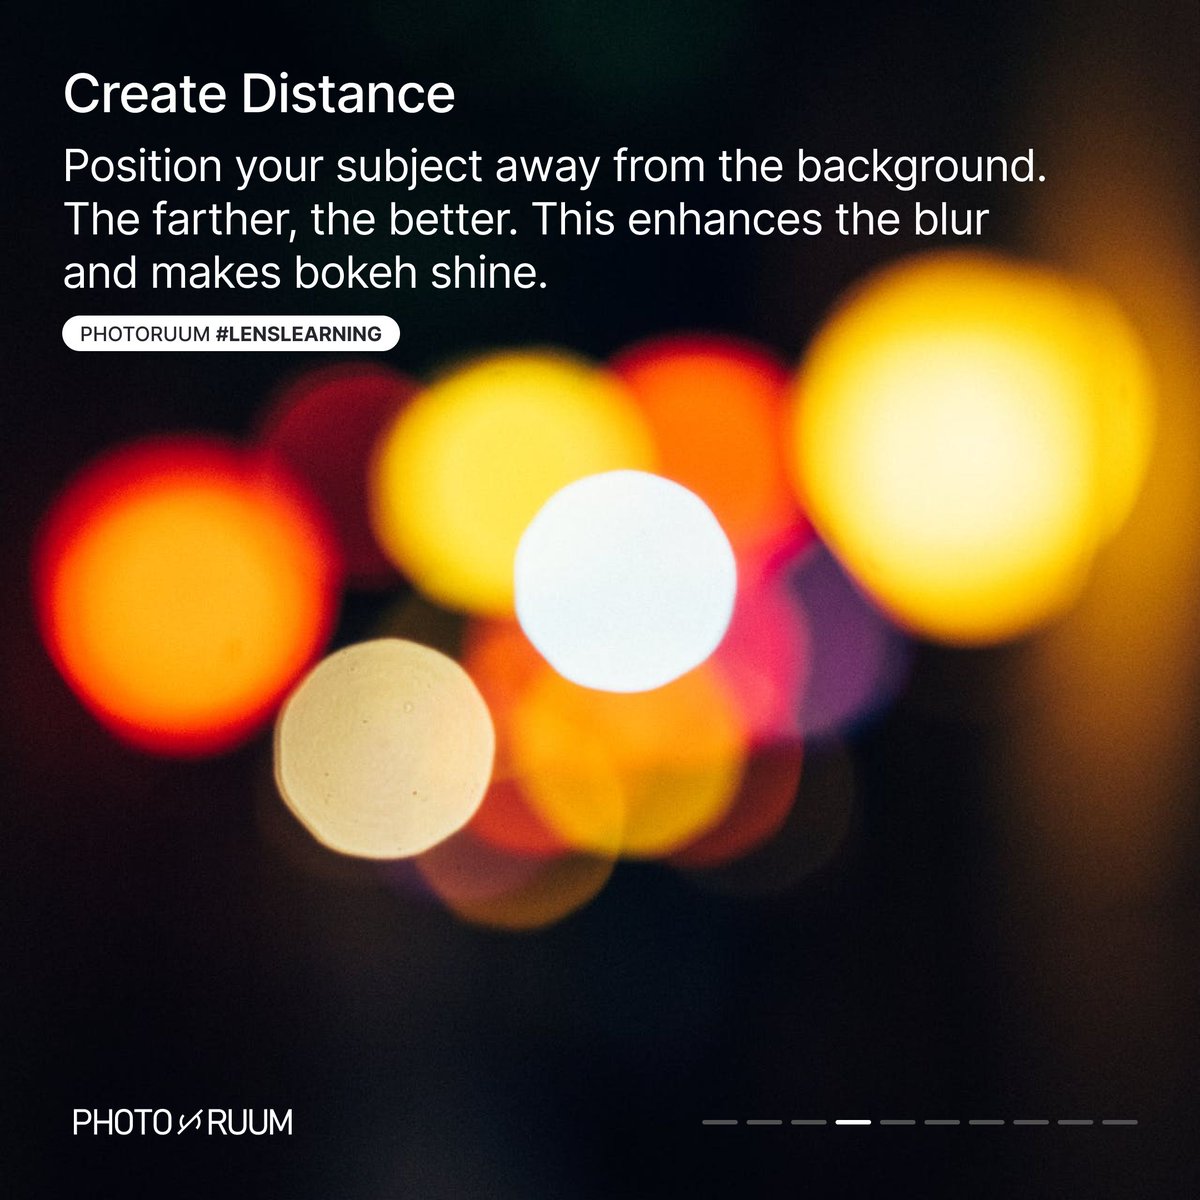 Swipe to master the art of bokeh and transform your photos. 

Follow @Photoruum for more

Click the link in our bio to join our community 

#Photoruum
#Community
#Africa
#Photography
#Photographer
#Photoruumcommunity
#Bokeheffect
#Photographytechniques